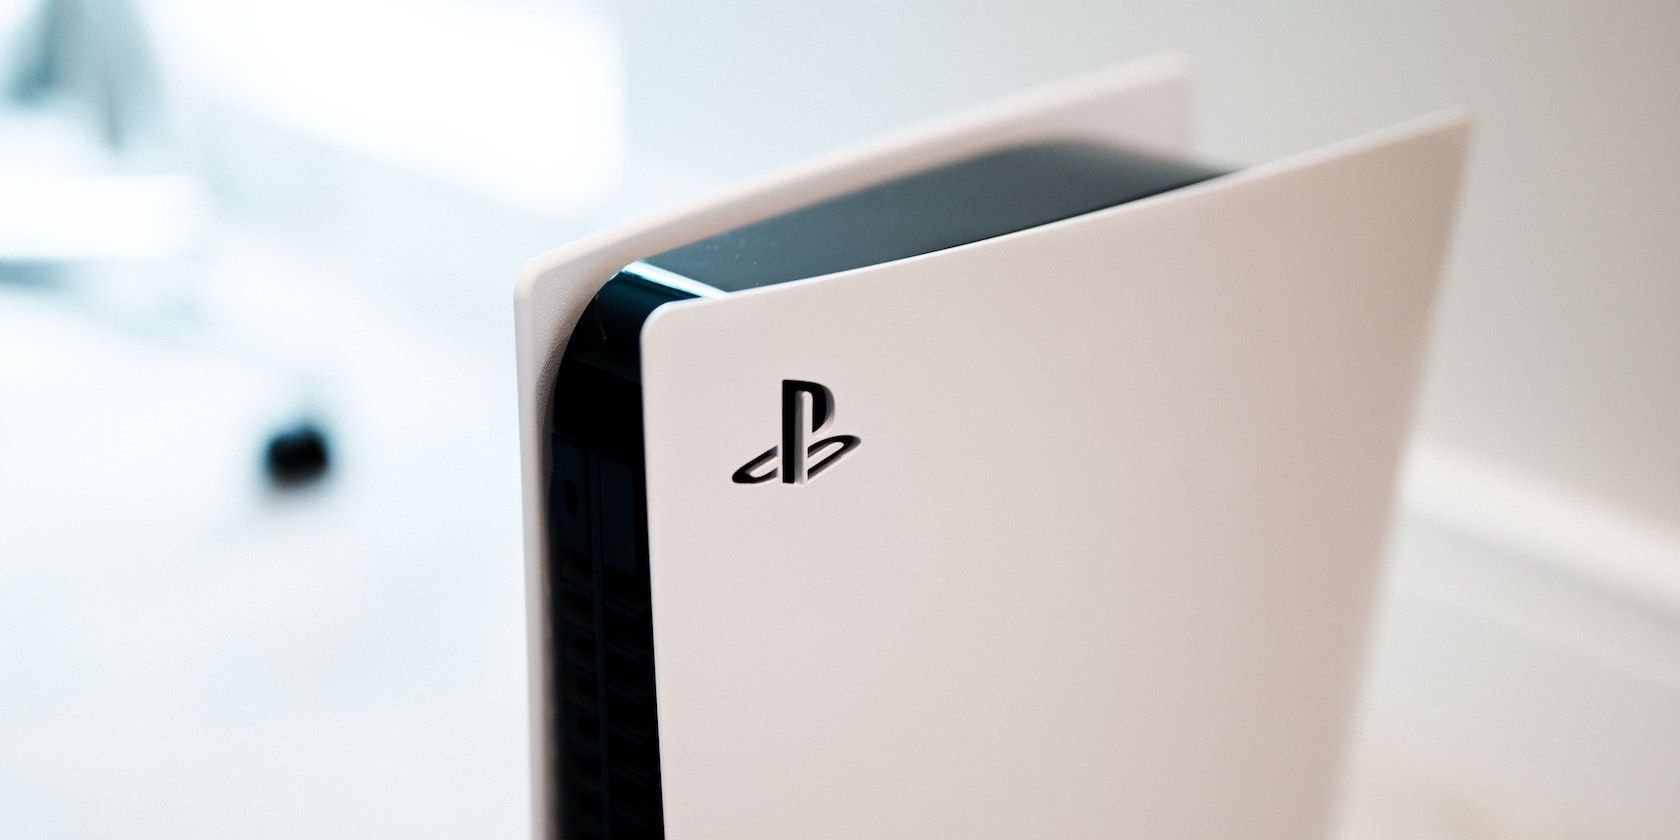 Why You Should Stop Looking for a PS5 Until the End of 2021